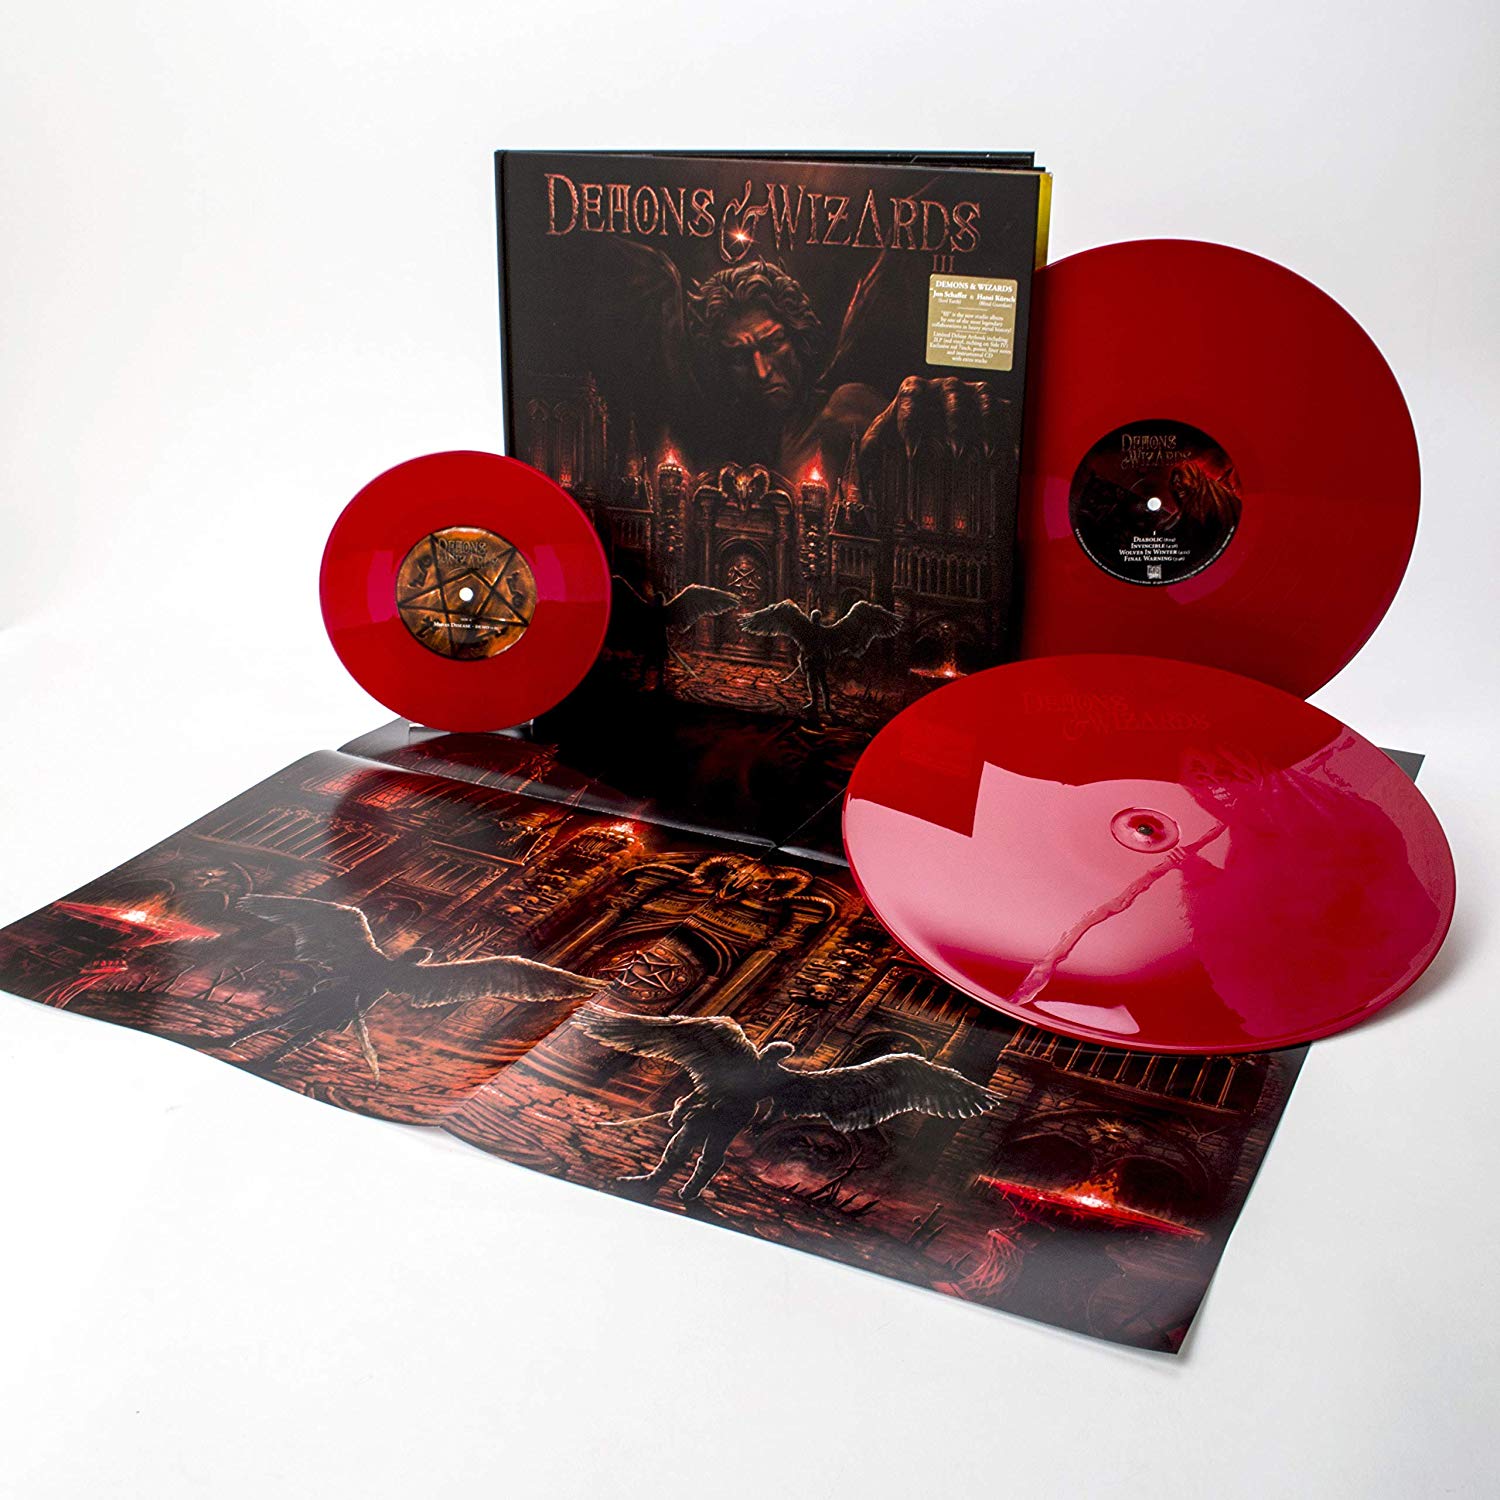 Demon and Wizards - III Deluxe Ltd Ed. Artbook 2LP with etched side D + 7", poster & CD